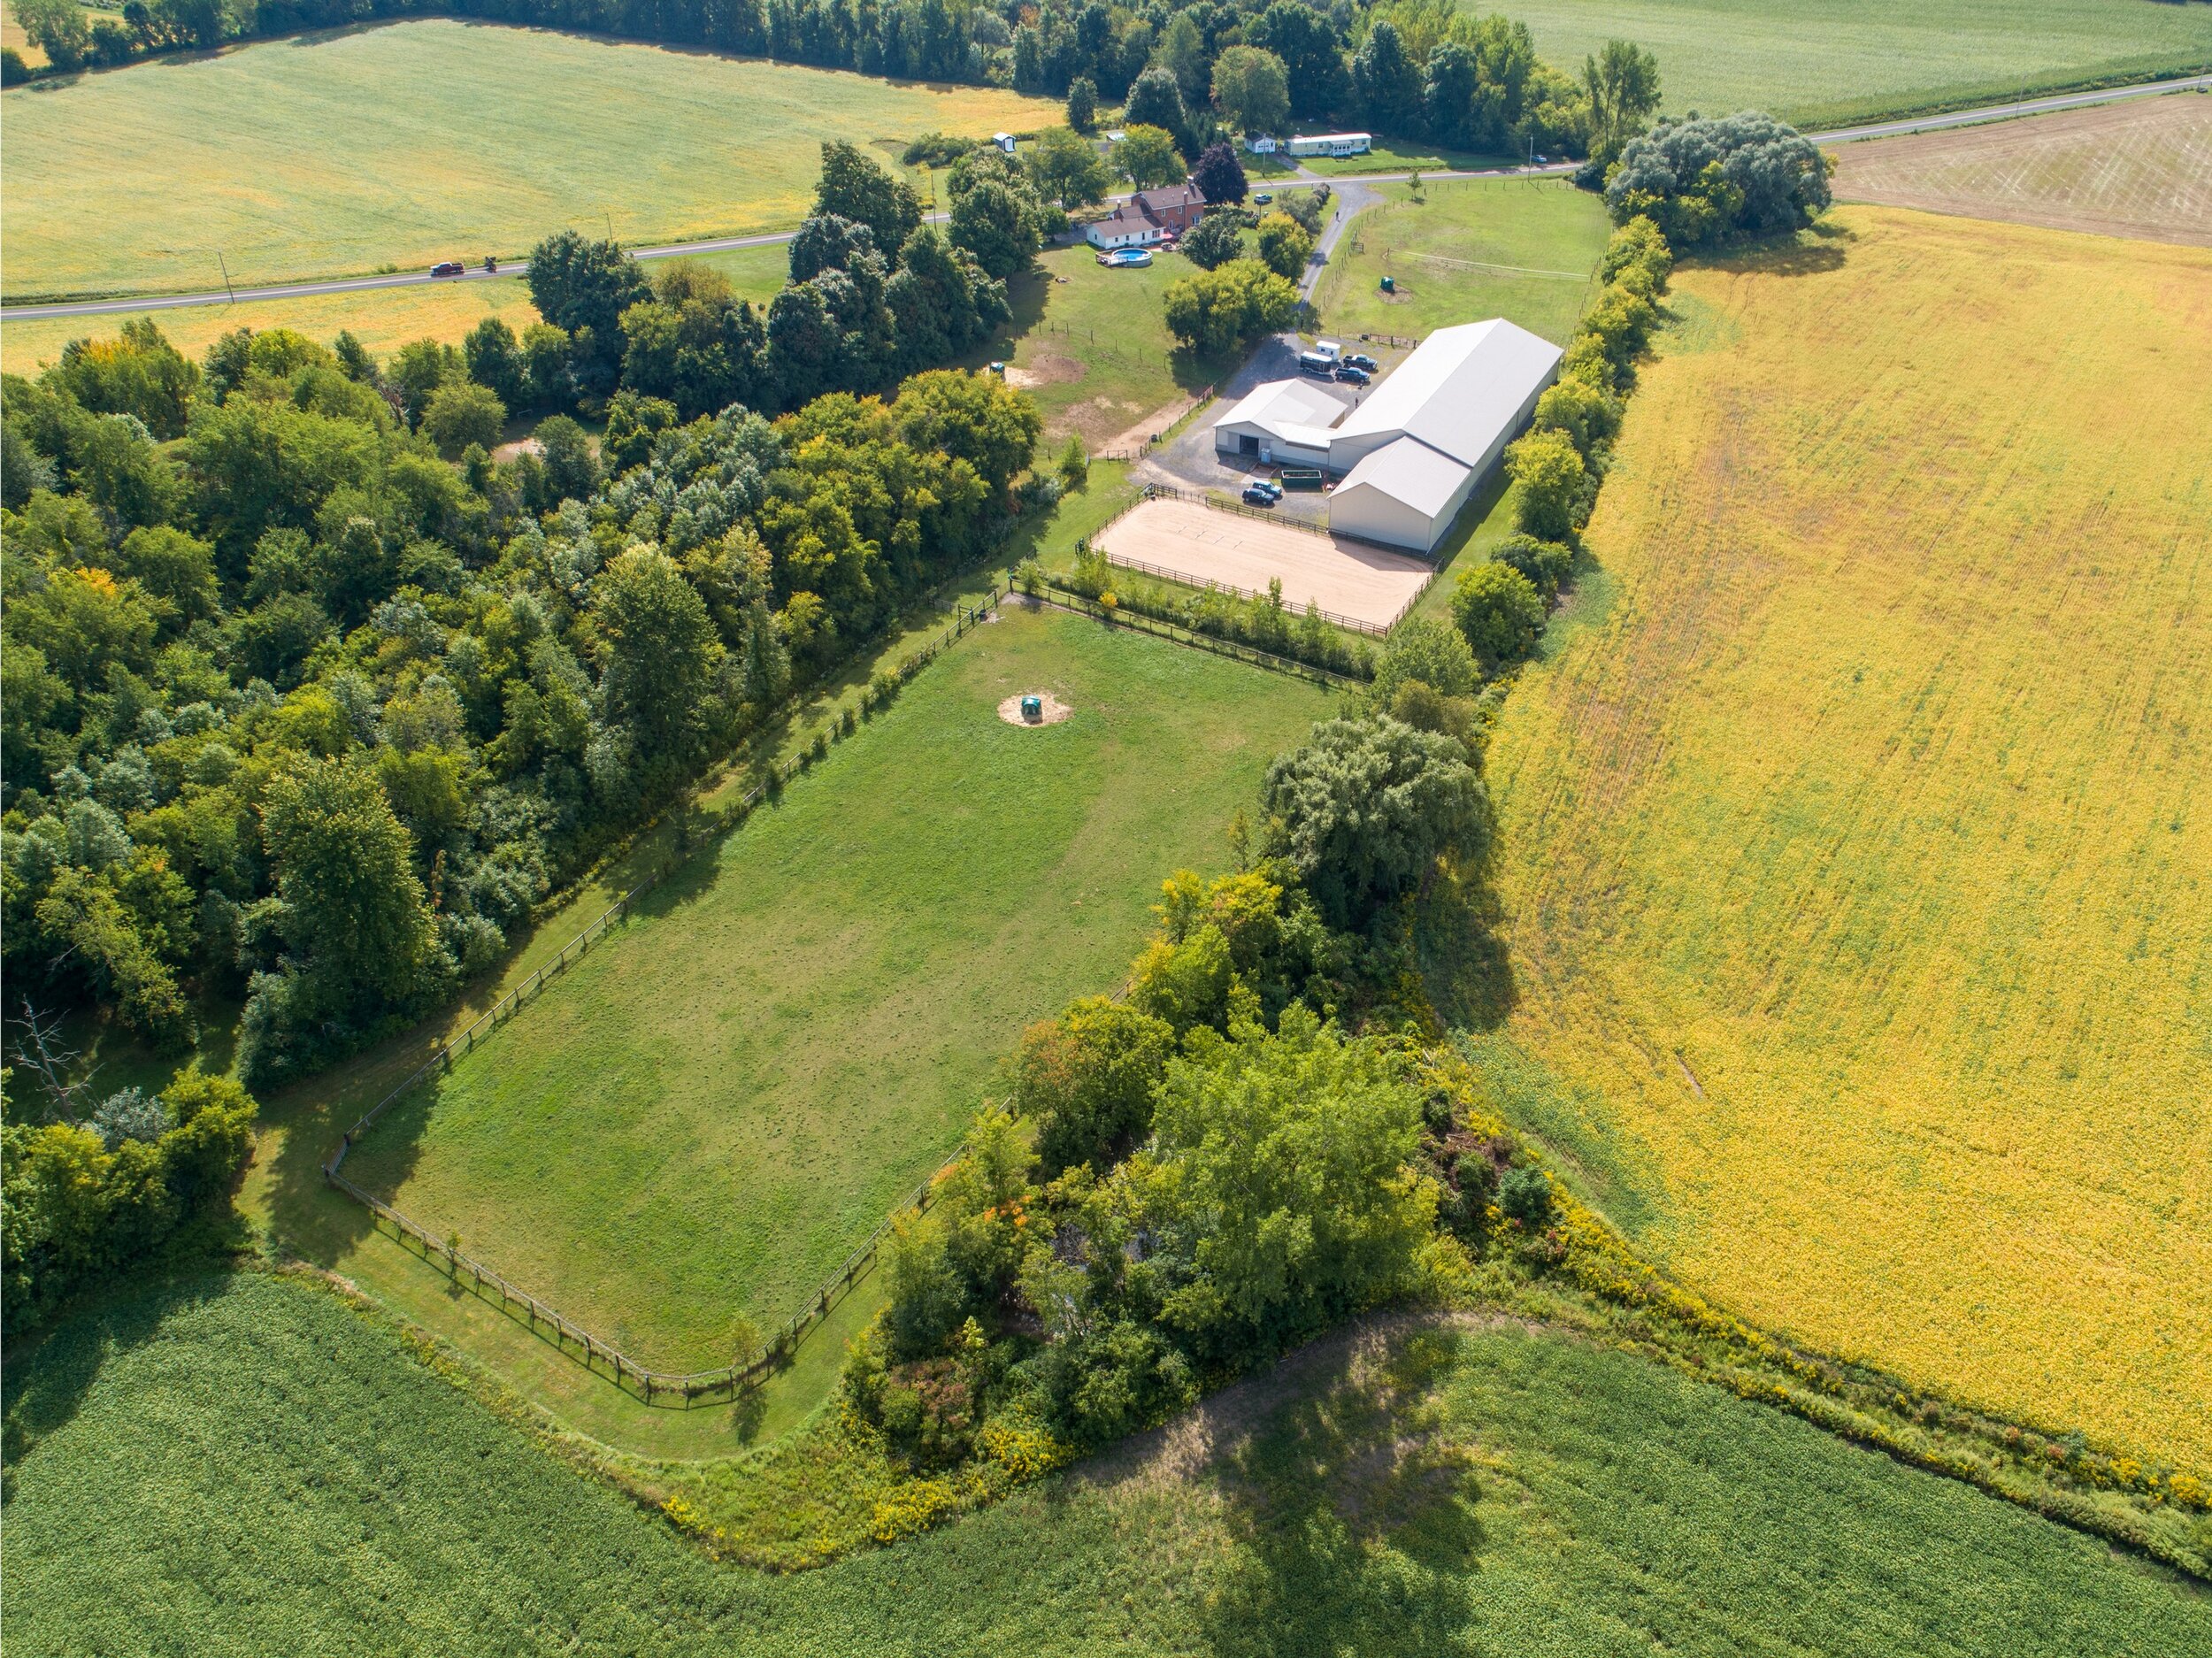 125 for sale 10050 Short Cut Rd, Weedsport, NY horse riding stables farm ranch equestrian property for .JPG